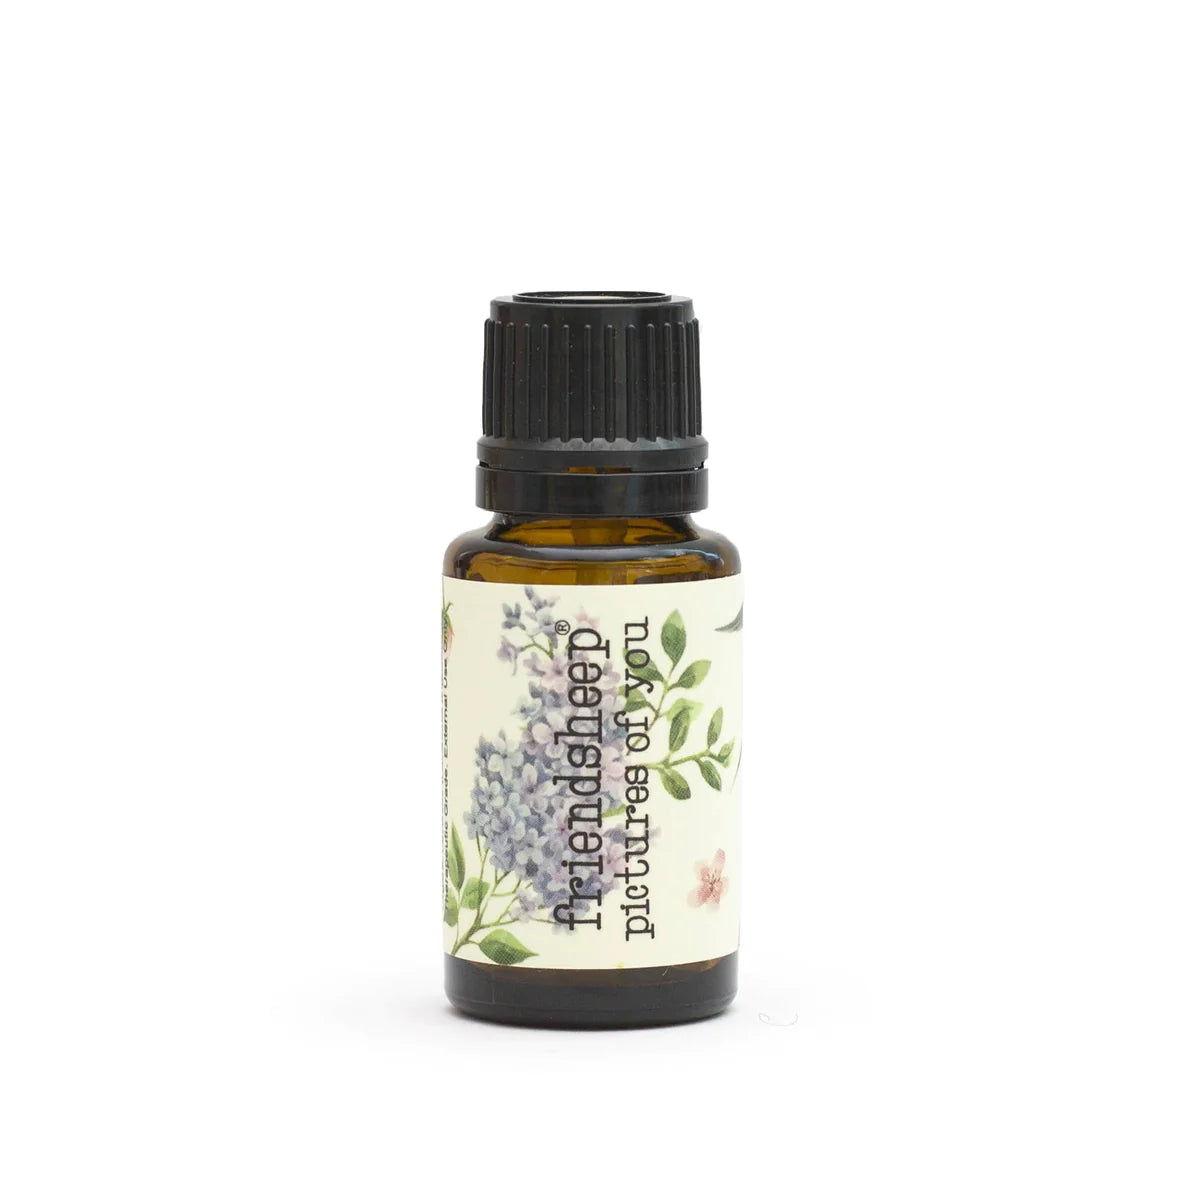 Friendsheep - Essential Oil Blend "Pictures of You"